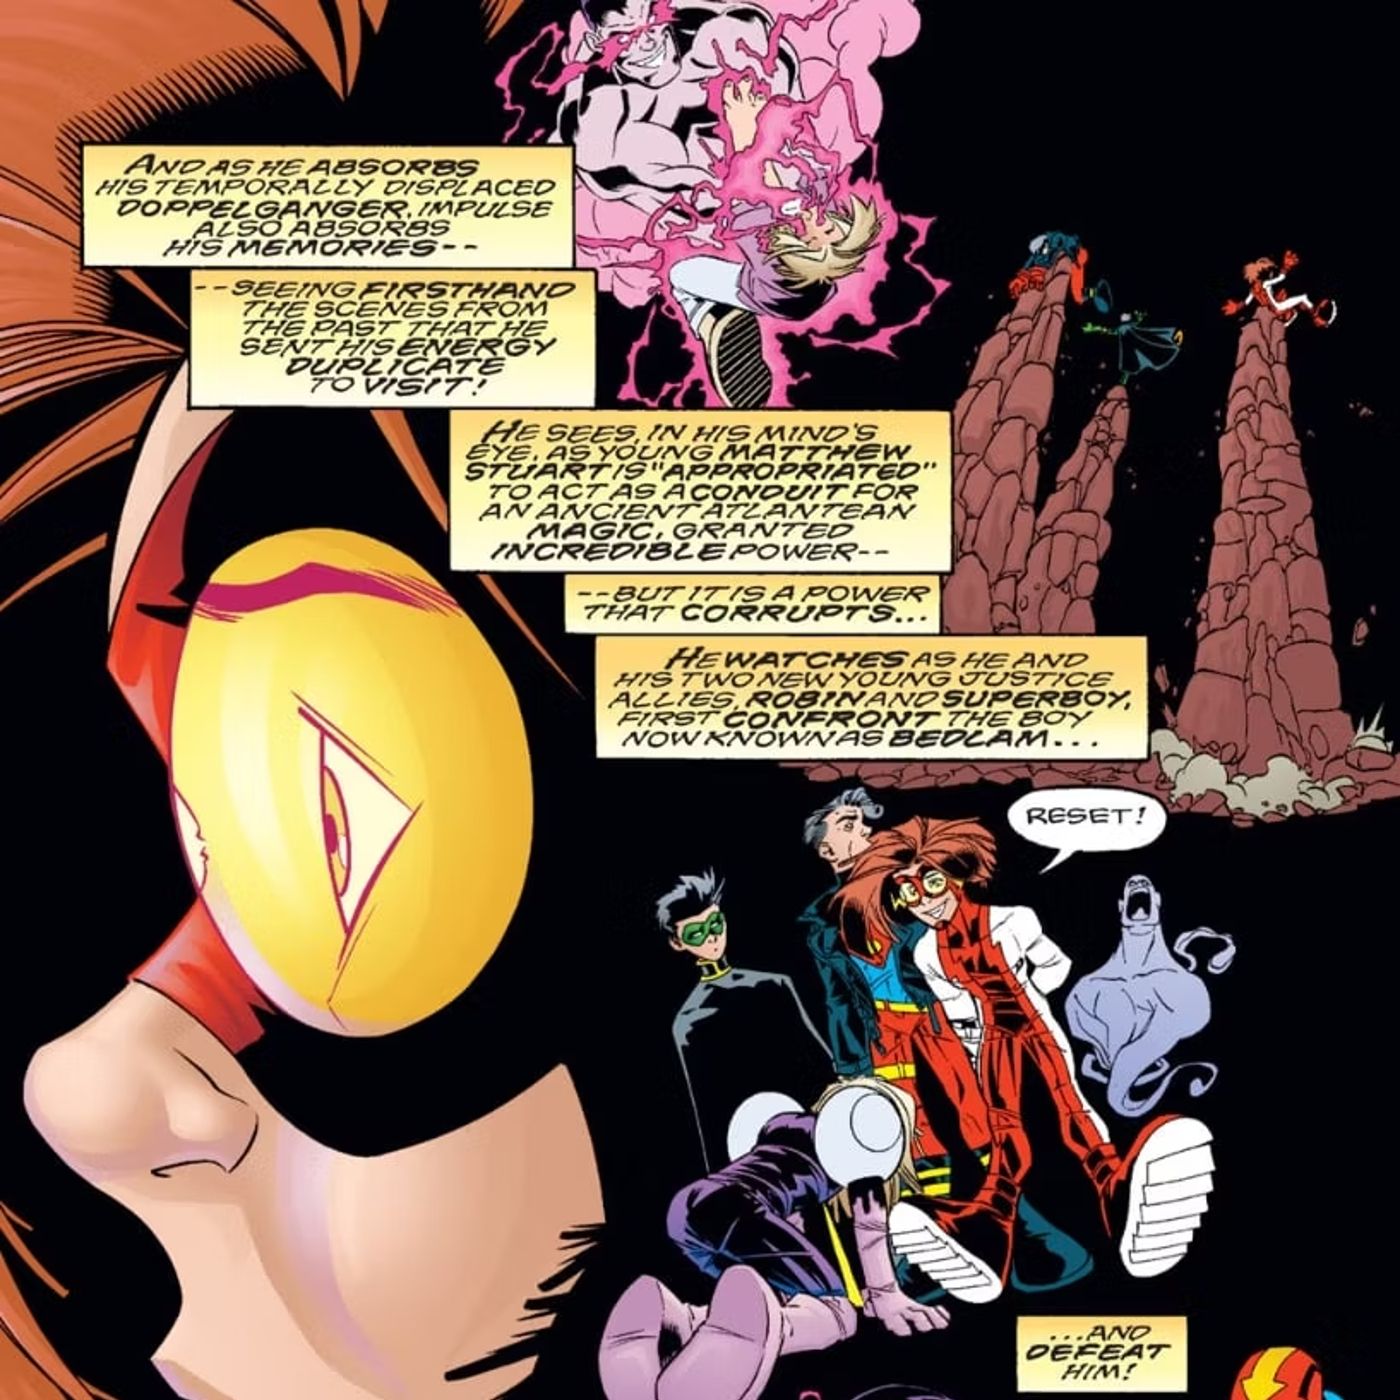 Impulse gets defeated in the pages of Young Justice.